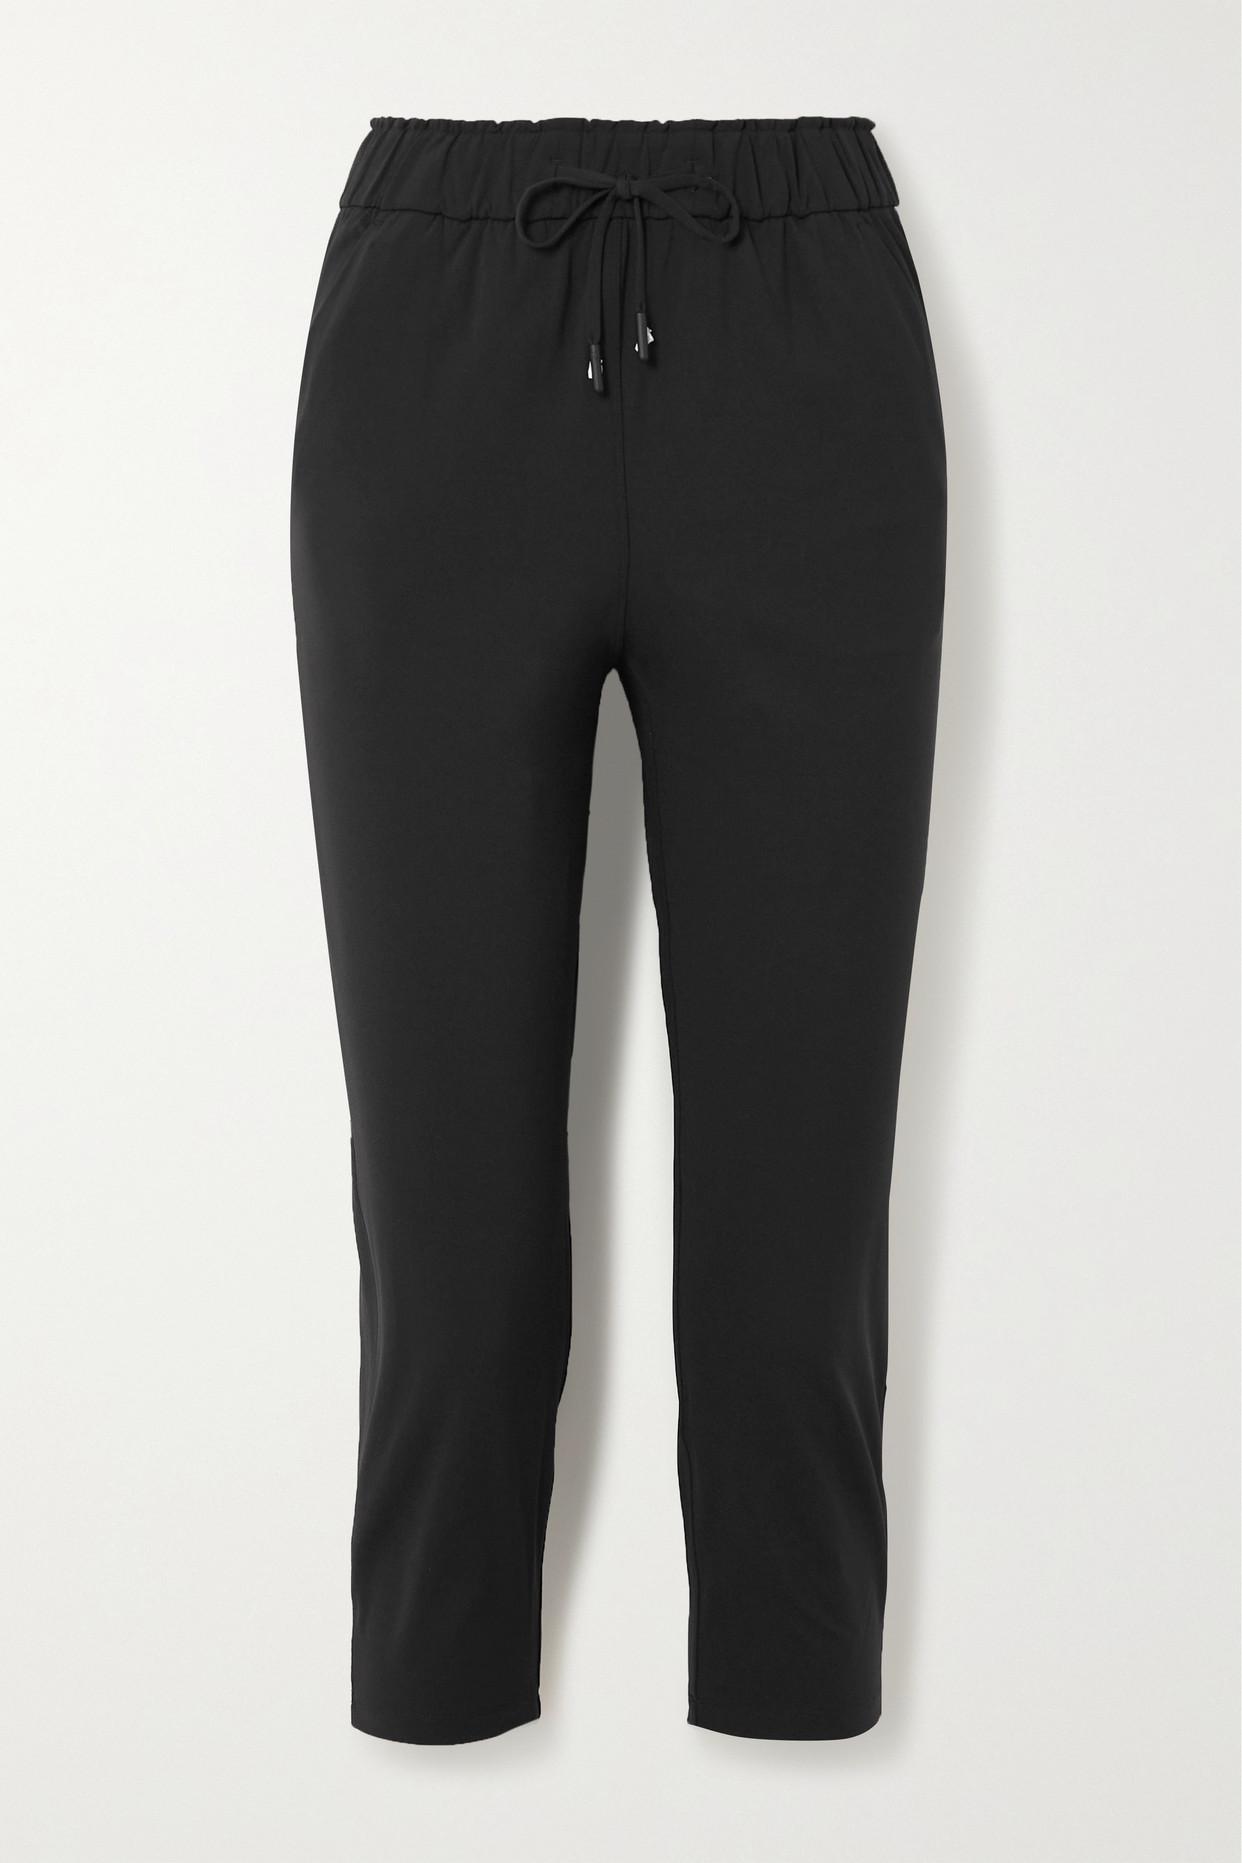 lululemon athletica Keep Moving Cropped Stretch Track Pants in Black | Lyst